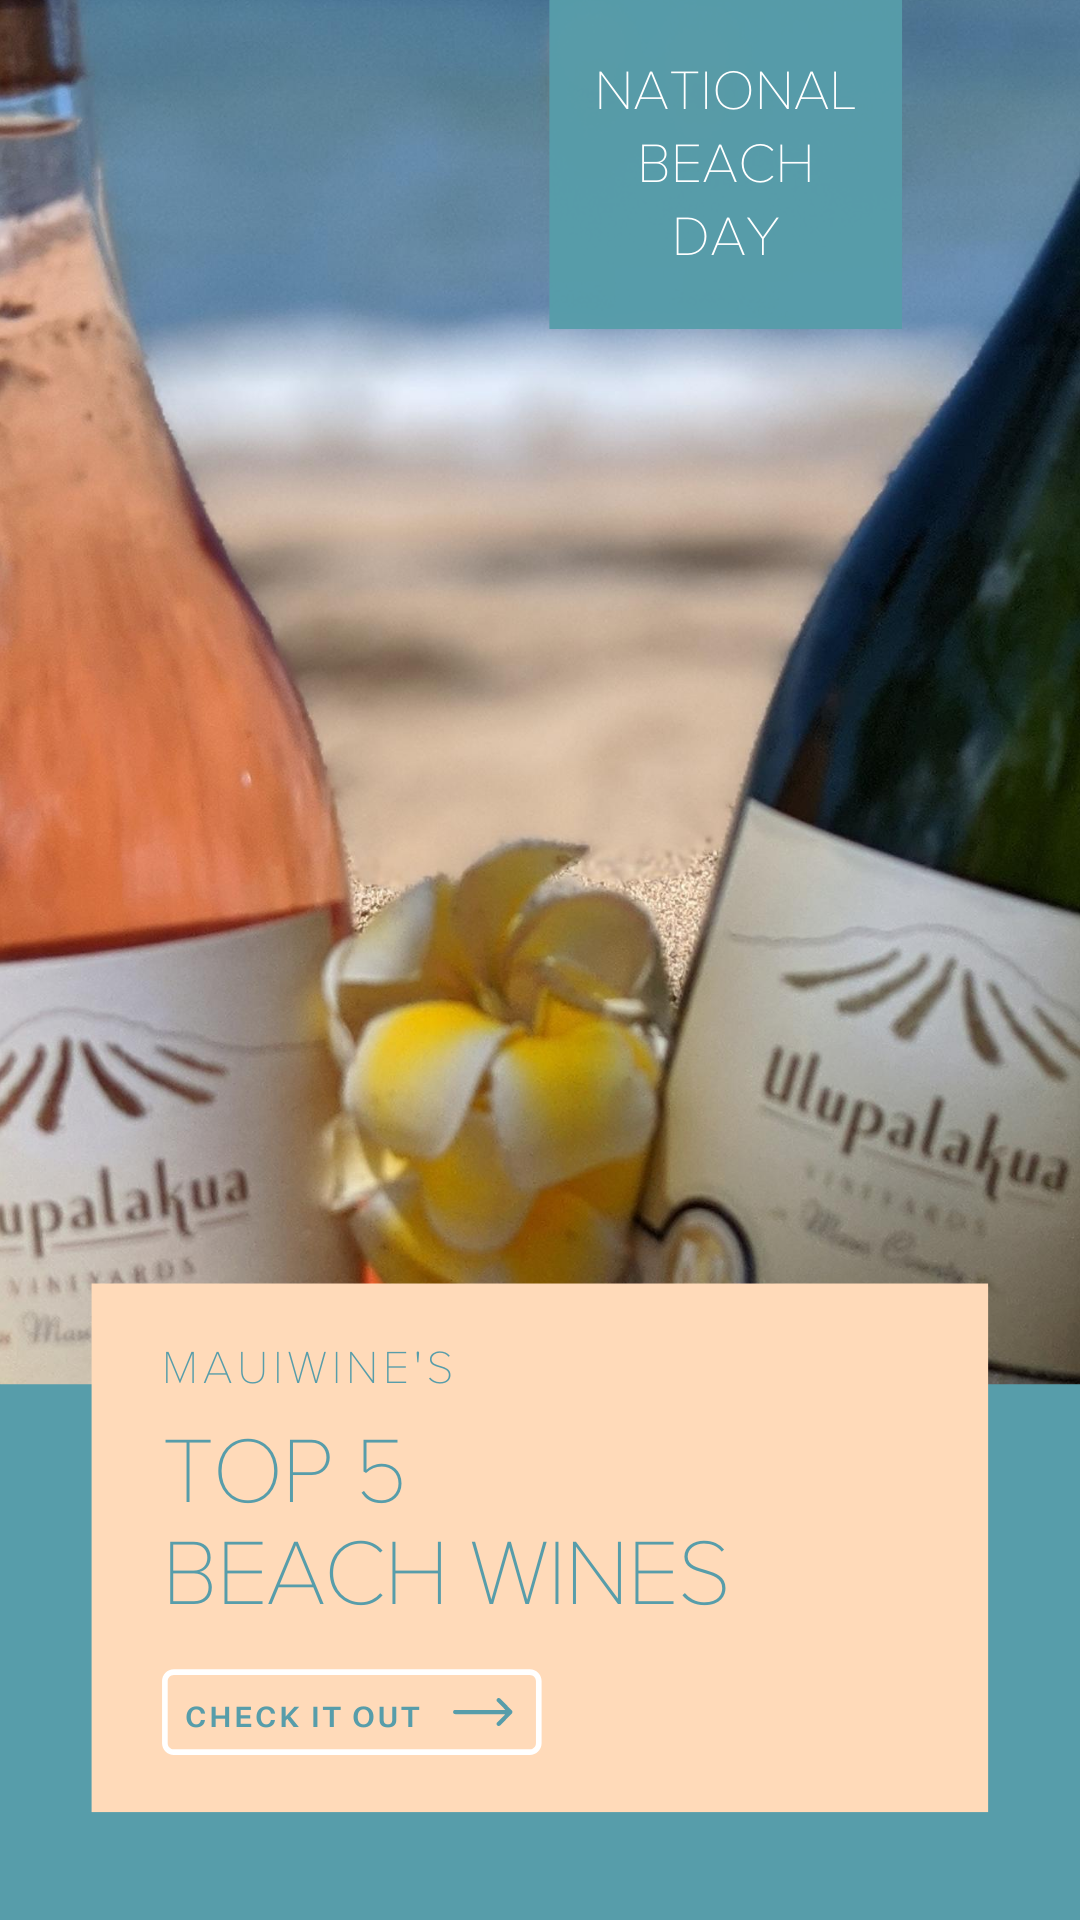 Top 5 Beach Wines for National Beach Day MauiWine